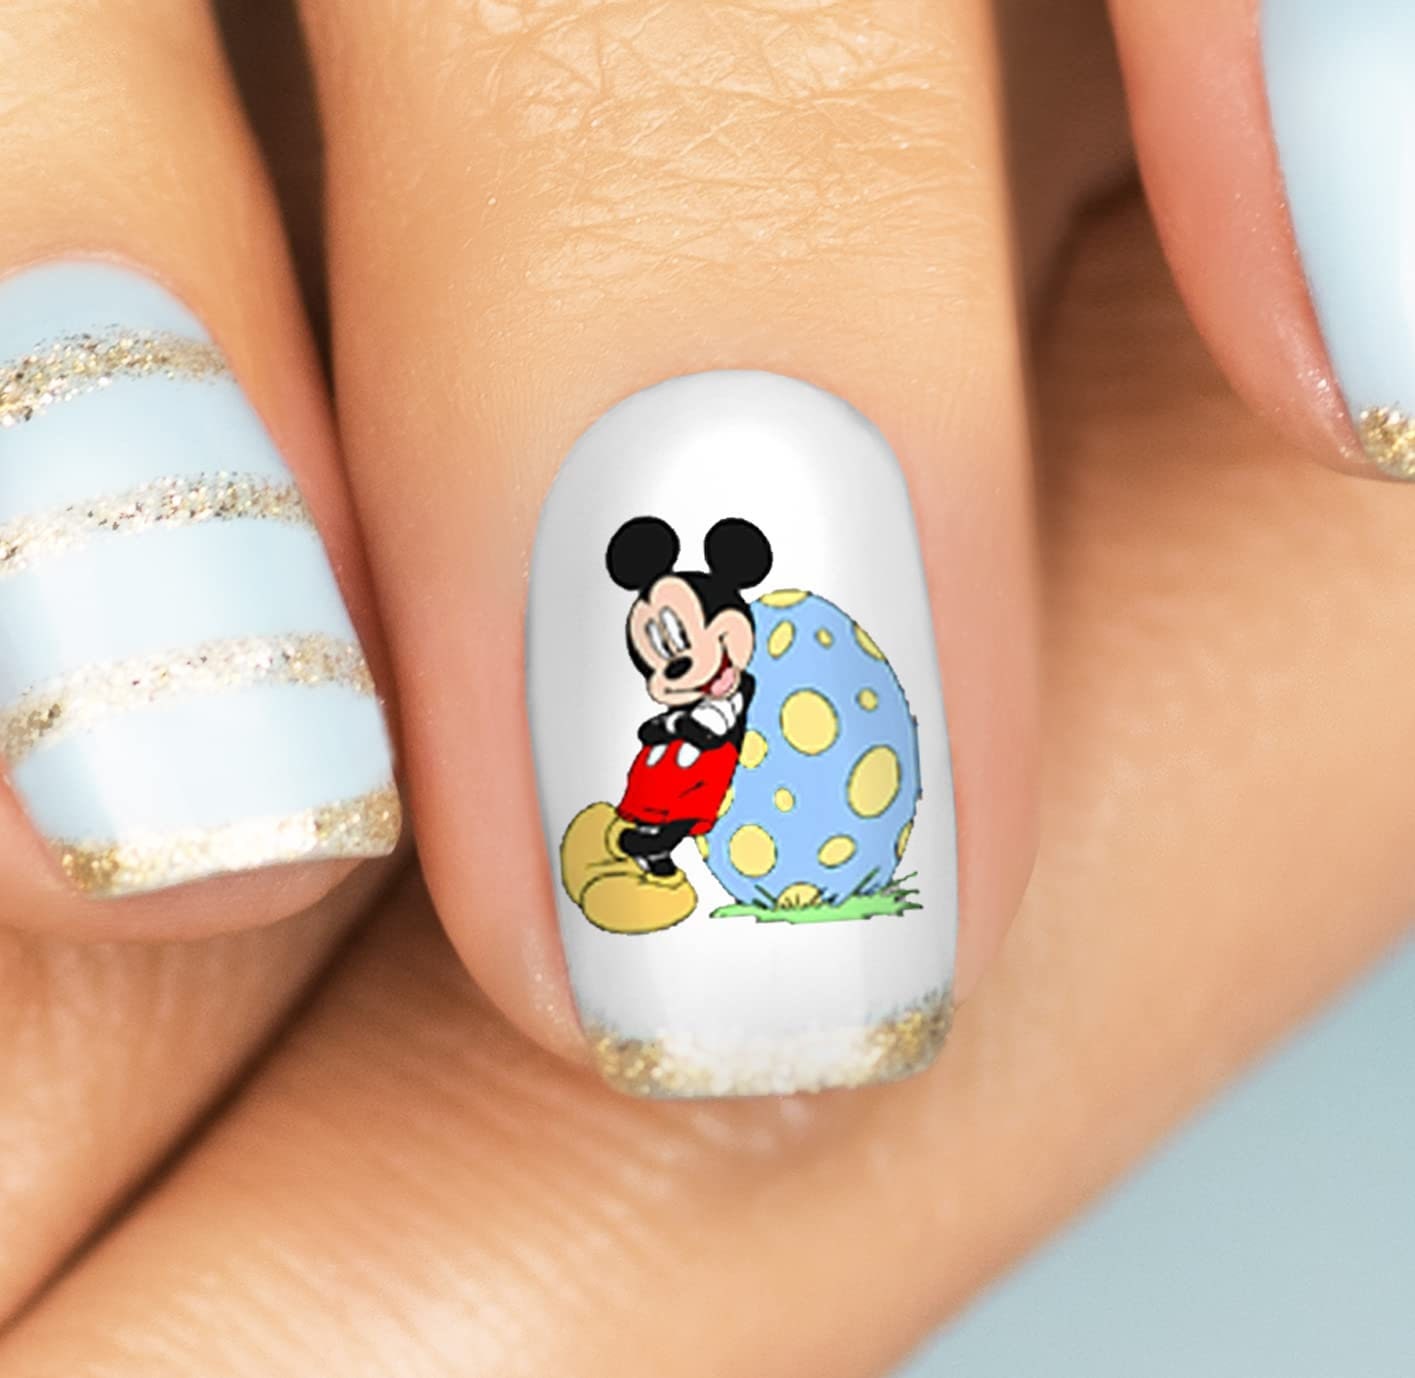 Mickey Mouse & Minne Mouse - Nail Art Decals - Moon Sugar Decals